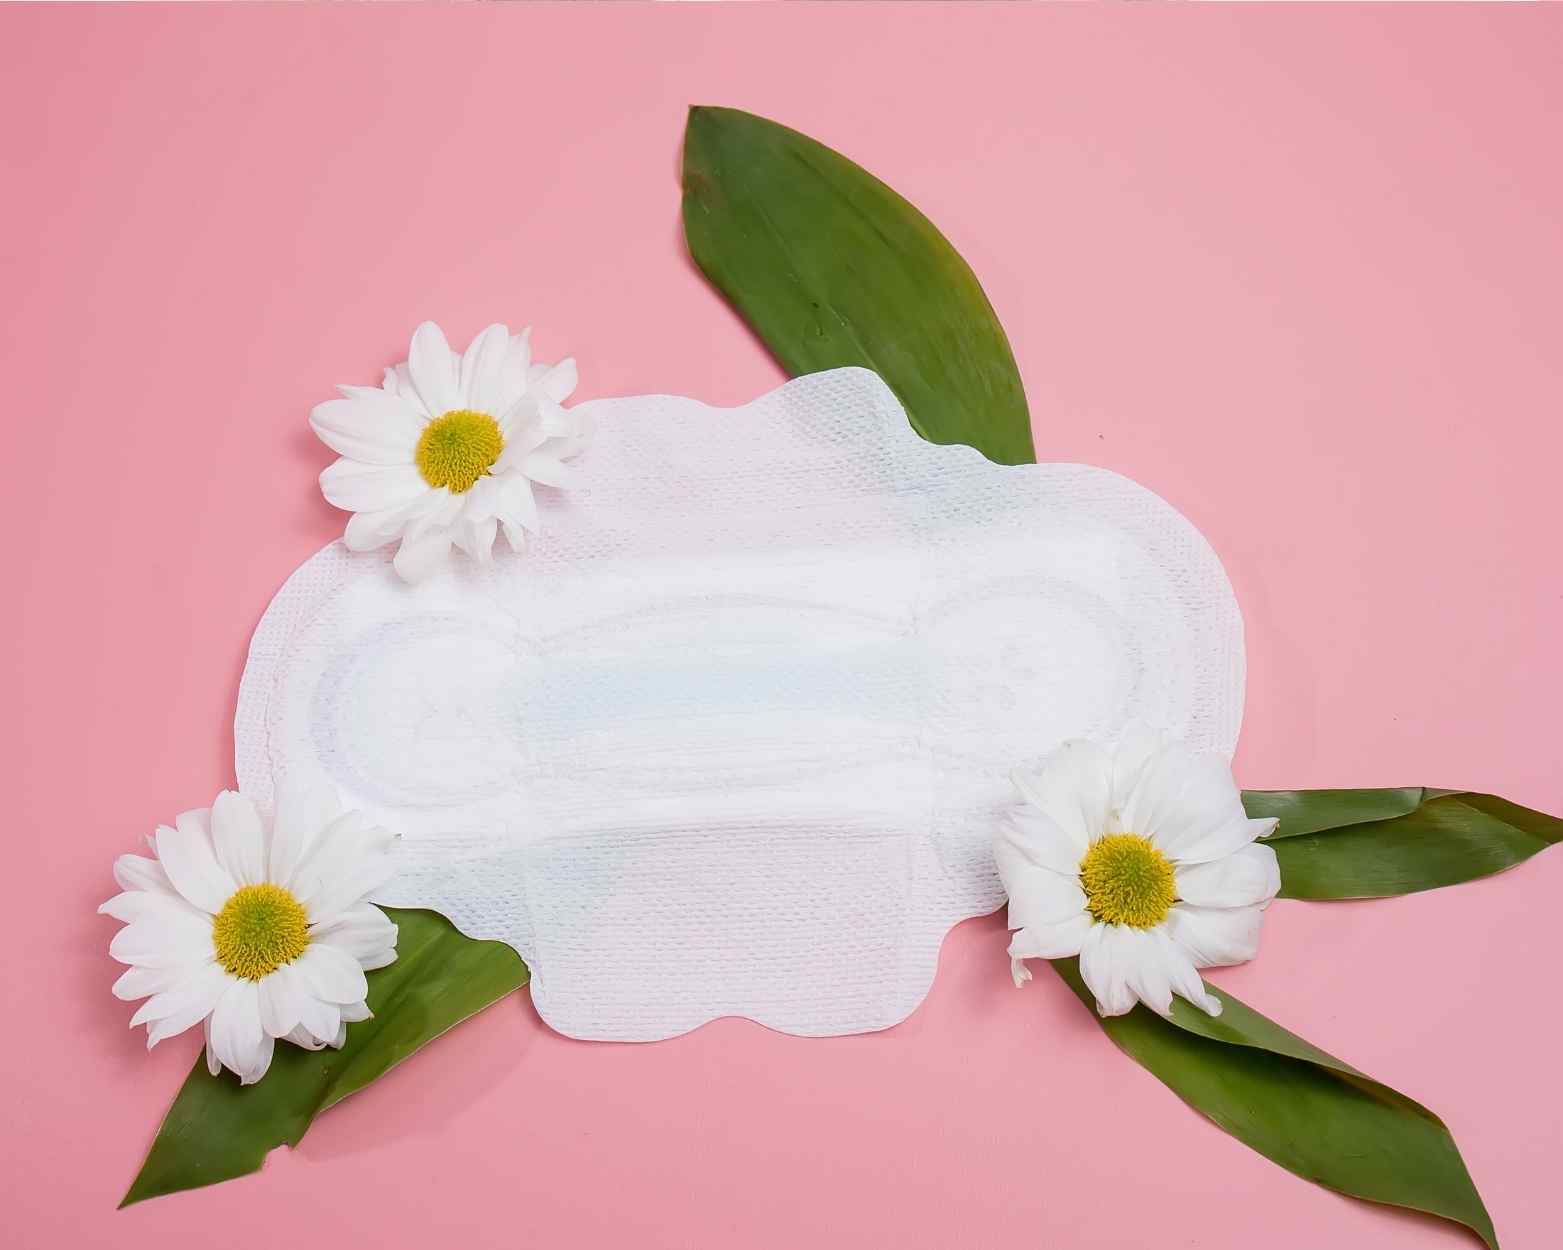 An all natural cotton organic pad for periods next to some daisies.